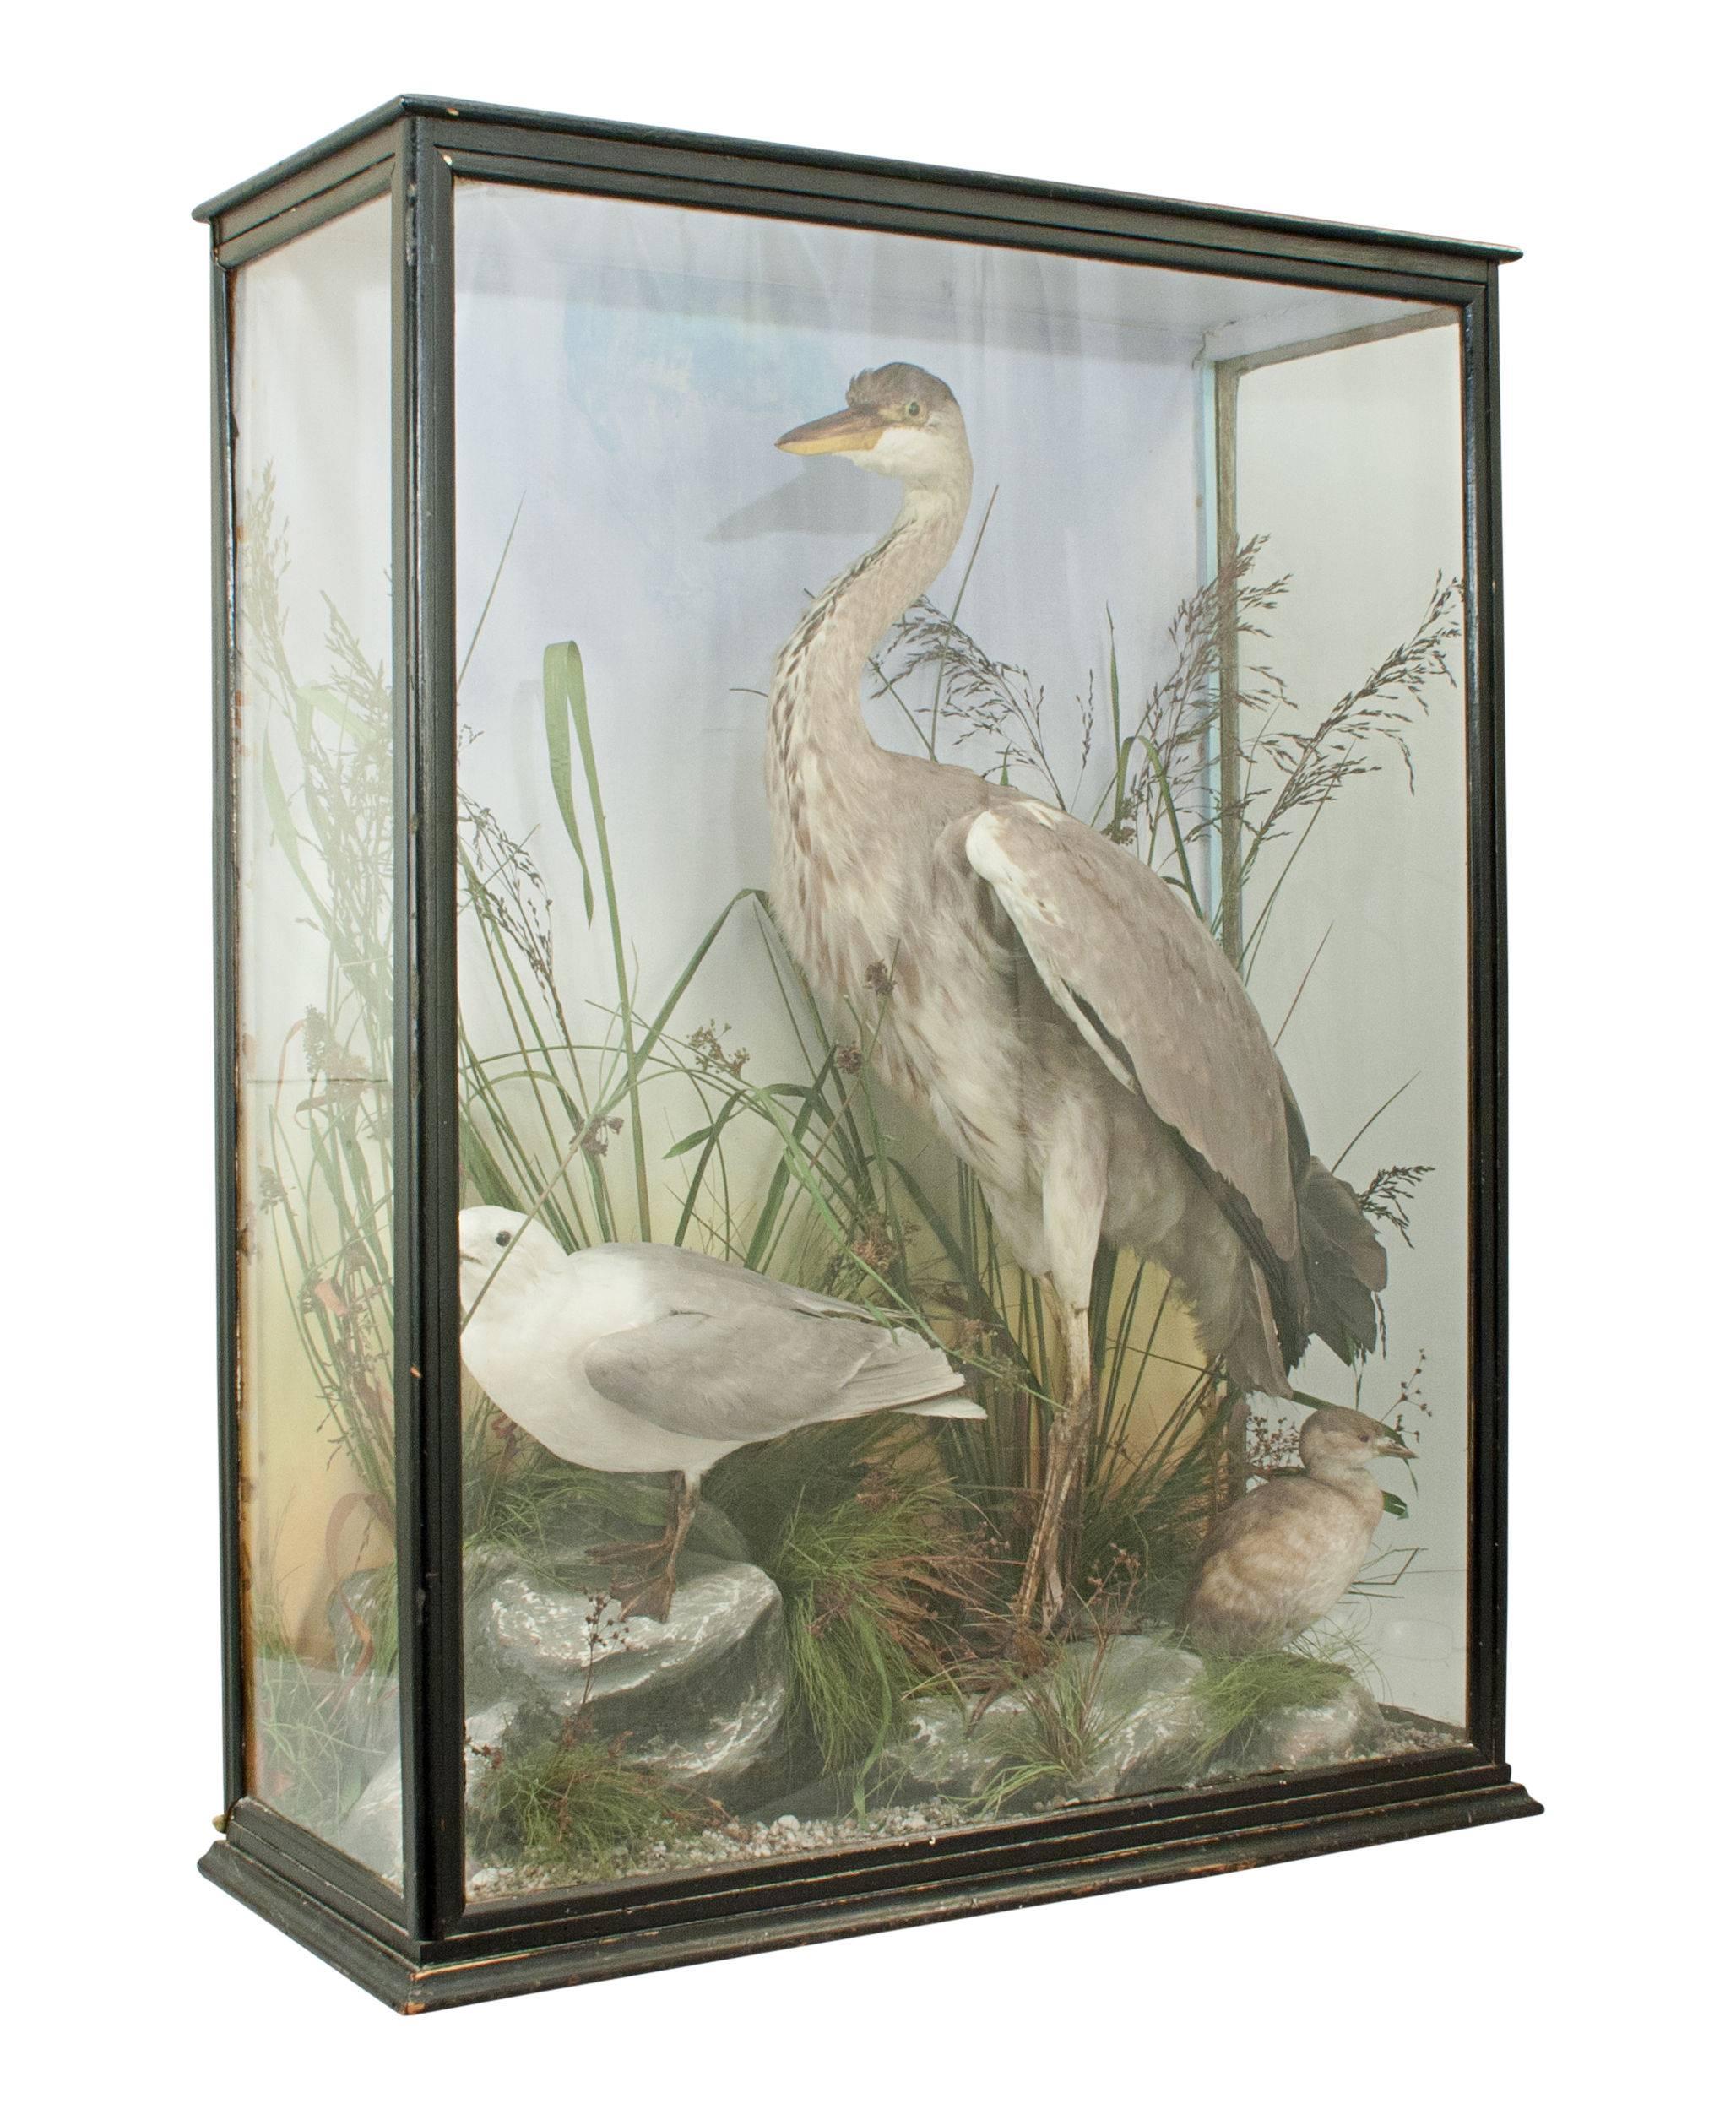 Vintage taxidermy, Heron and Gull.
A well prepared late 19th century set of three birds. The Heron, Gull and one other bird are mounted in a naturalistic setting. The birds are artistically modelled amongst fine groundwork all against a painted